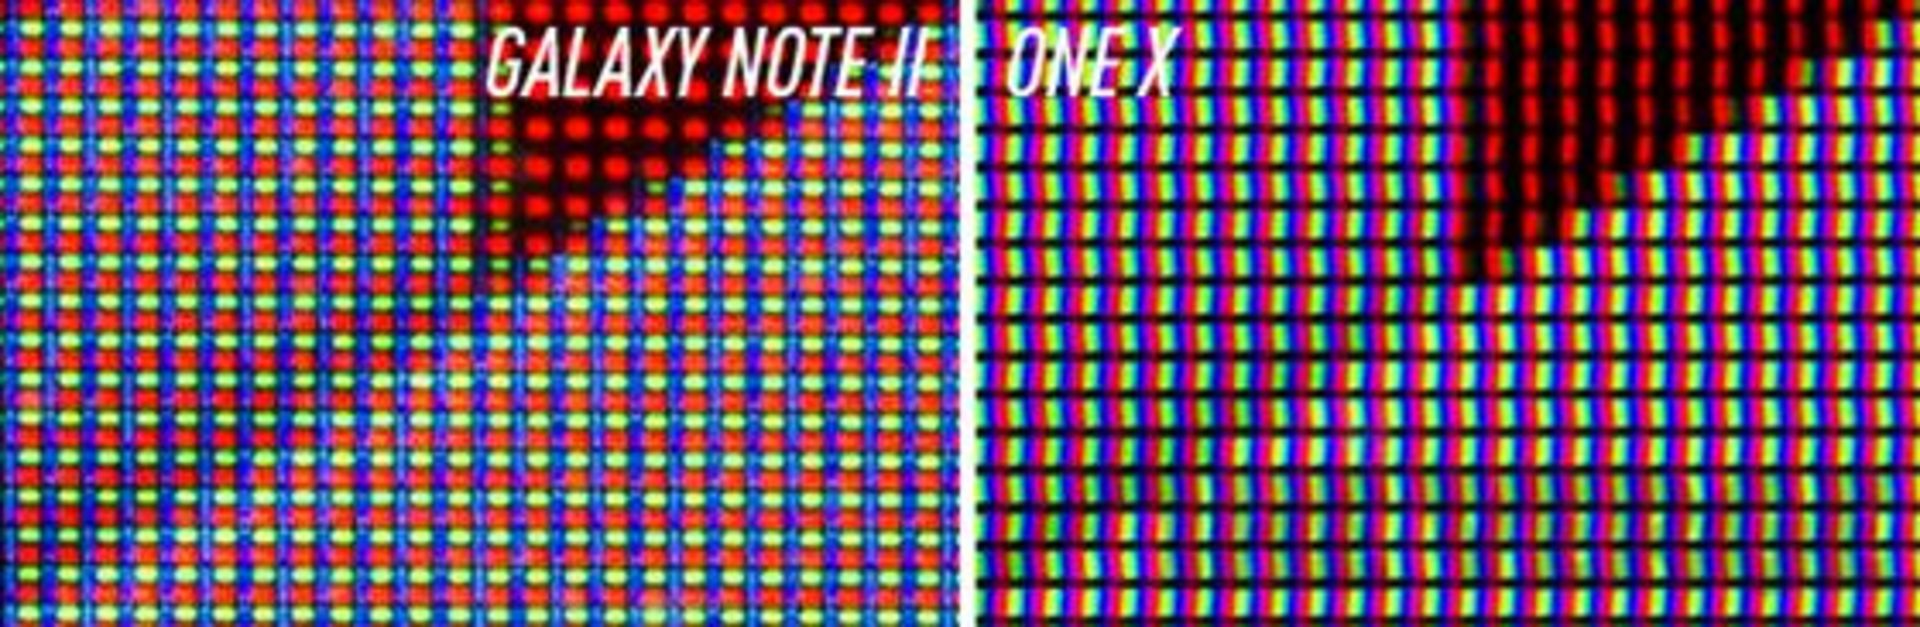 Note 2 vs One X